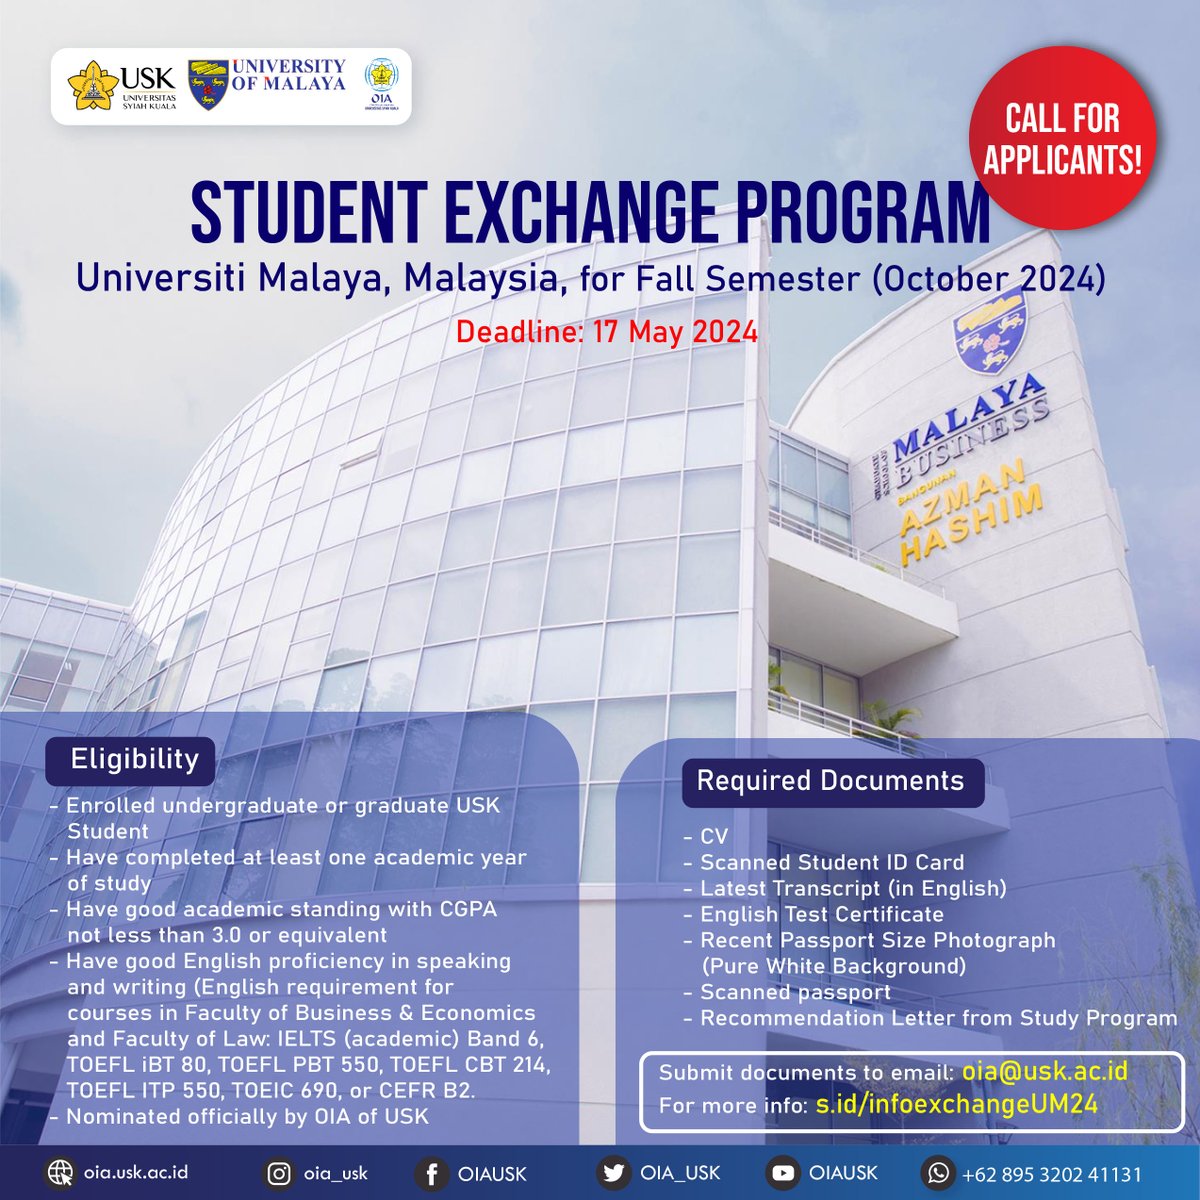 Call for applicants!
Universiti Malaya is currently open for registration for the student exchange program in Malaysia.
Do not miss this chance, sign up today!

#StudentExchange #Malaysia #UniversitiMalaya #StudyAbroad